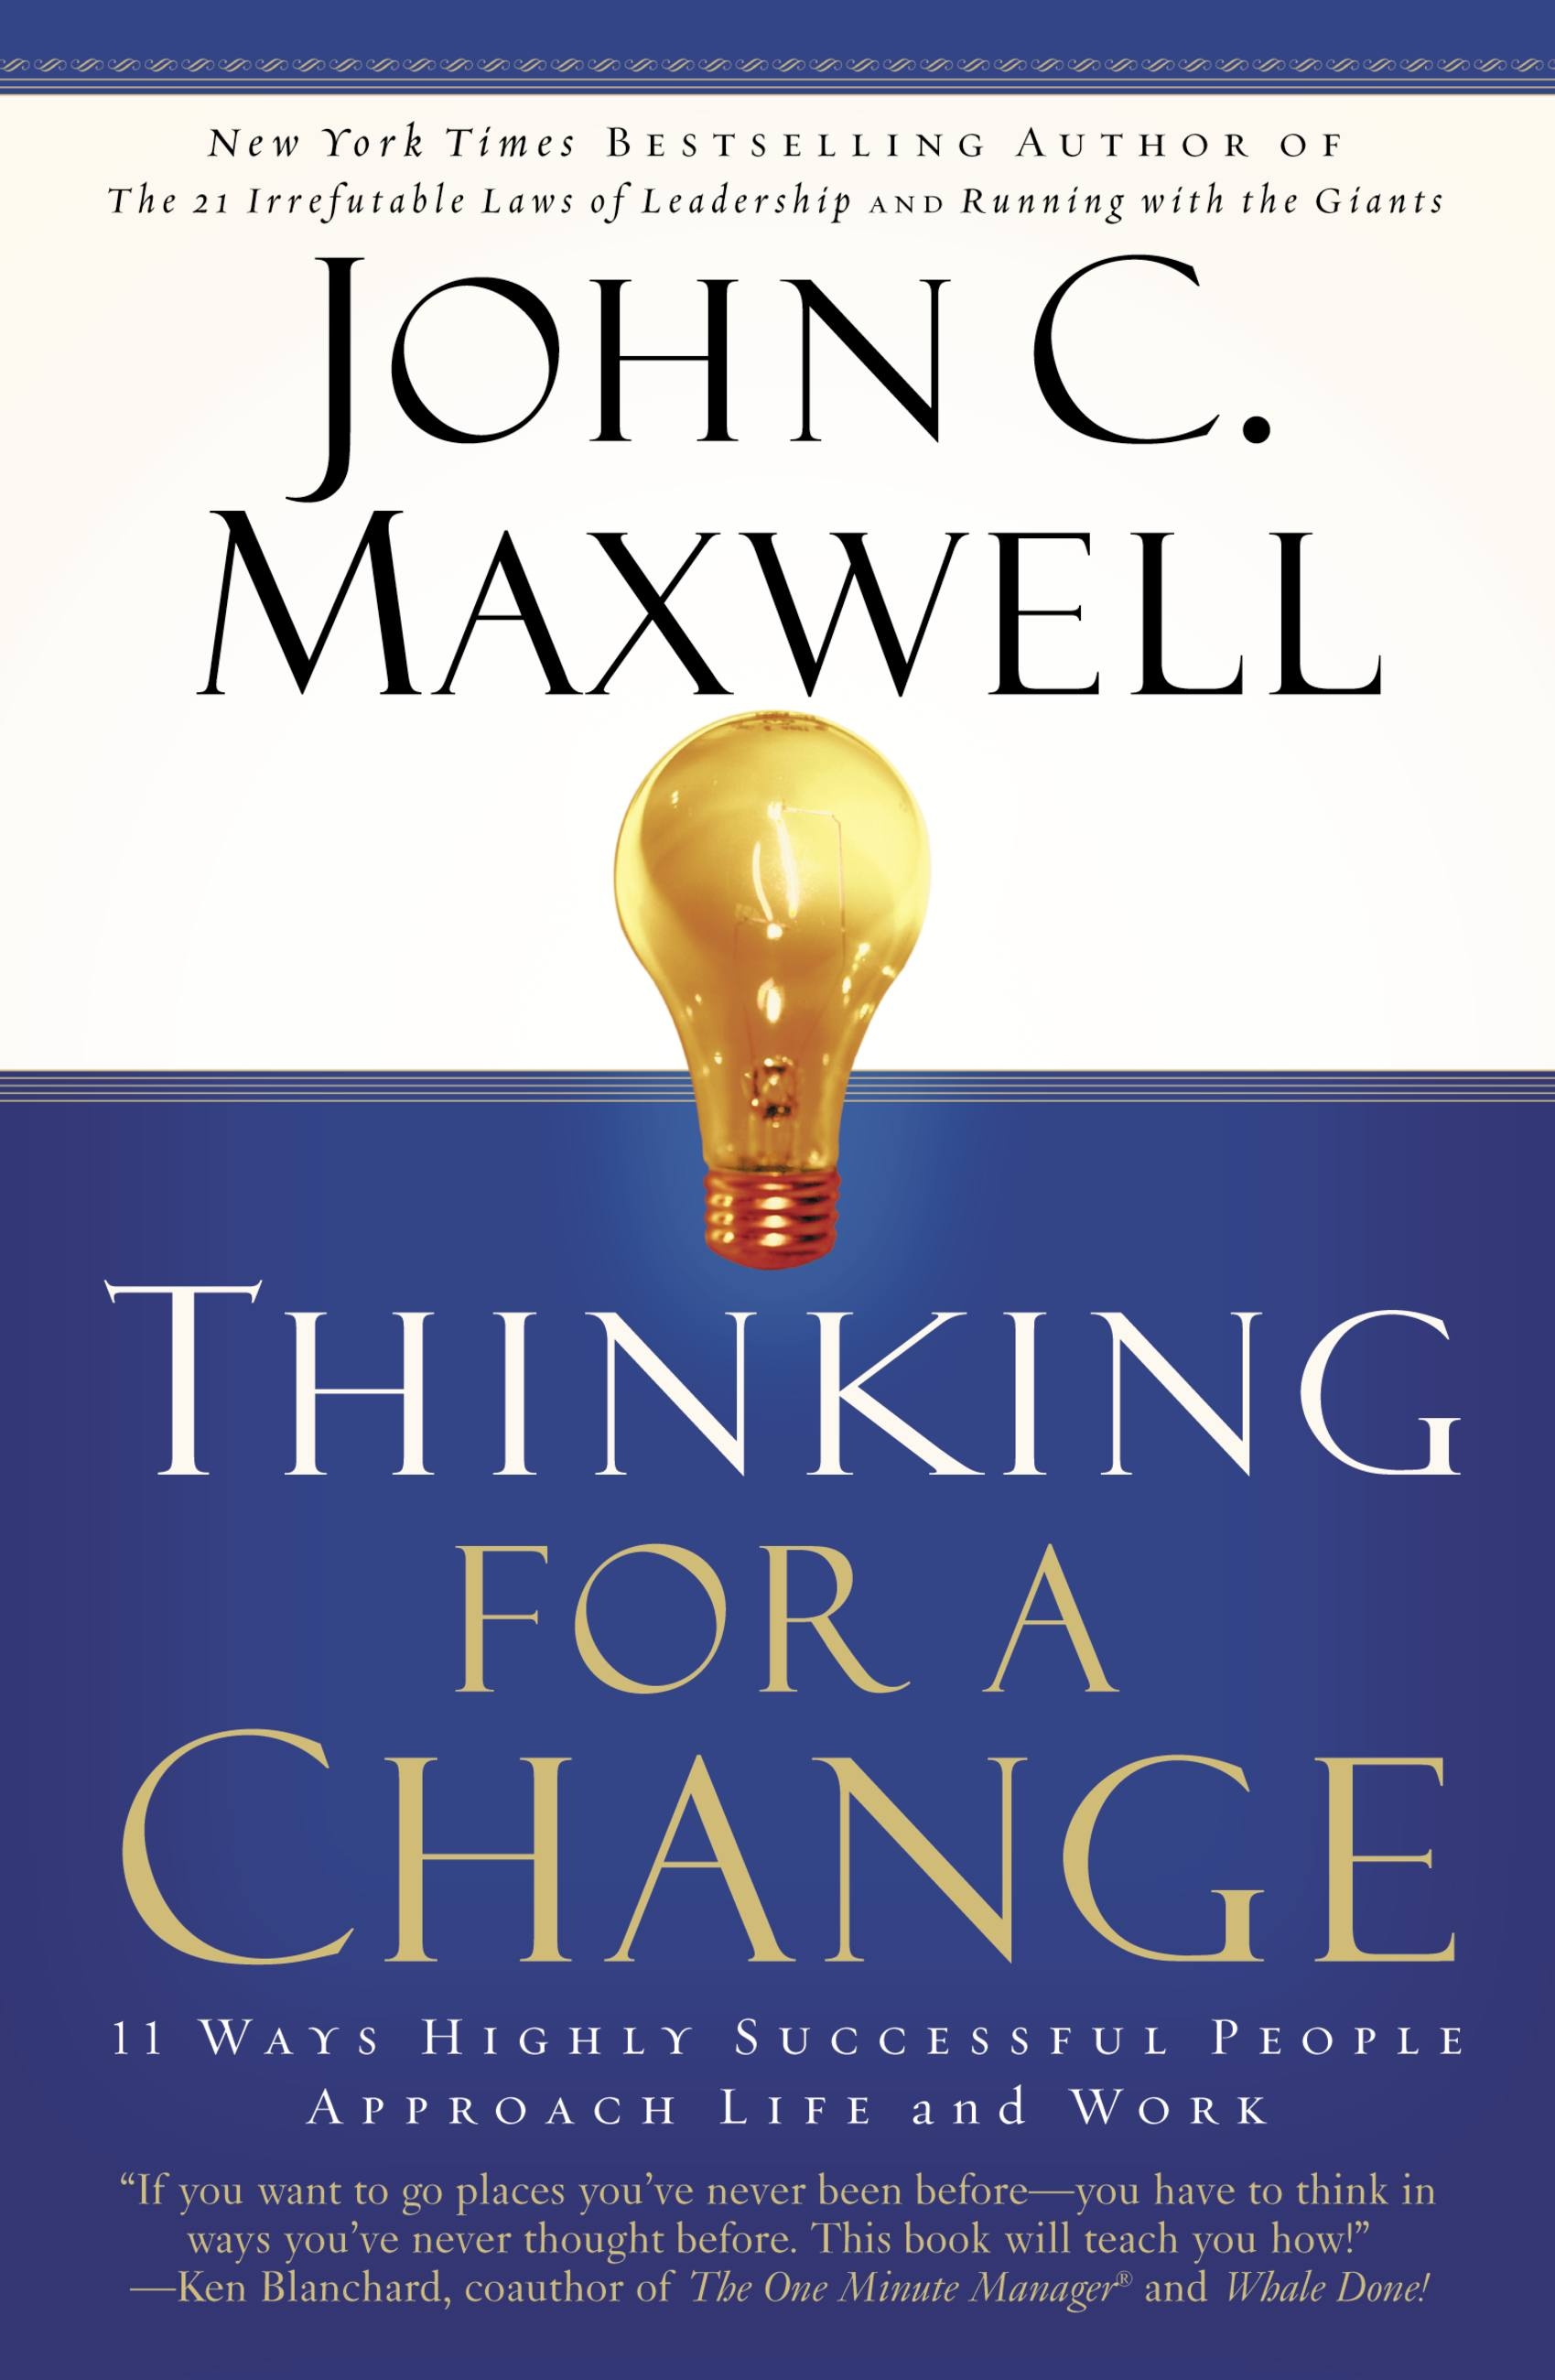 DOWNLOAD PDF: Thinking for a Change by John Maxwell 19